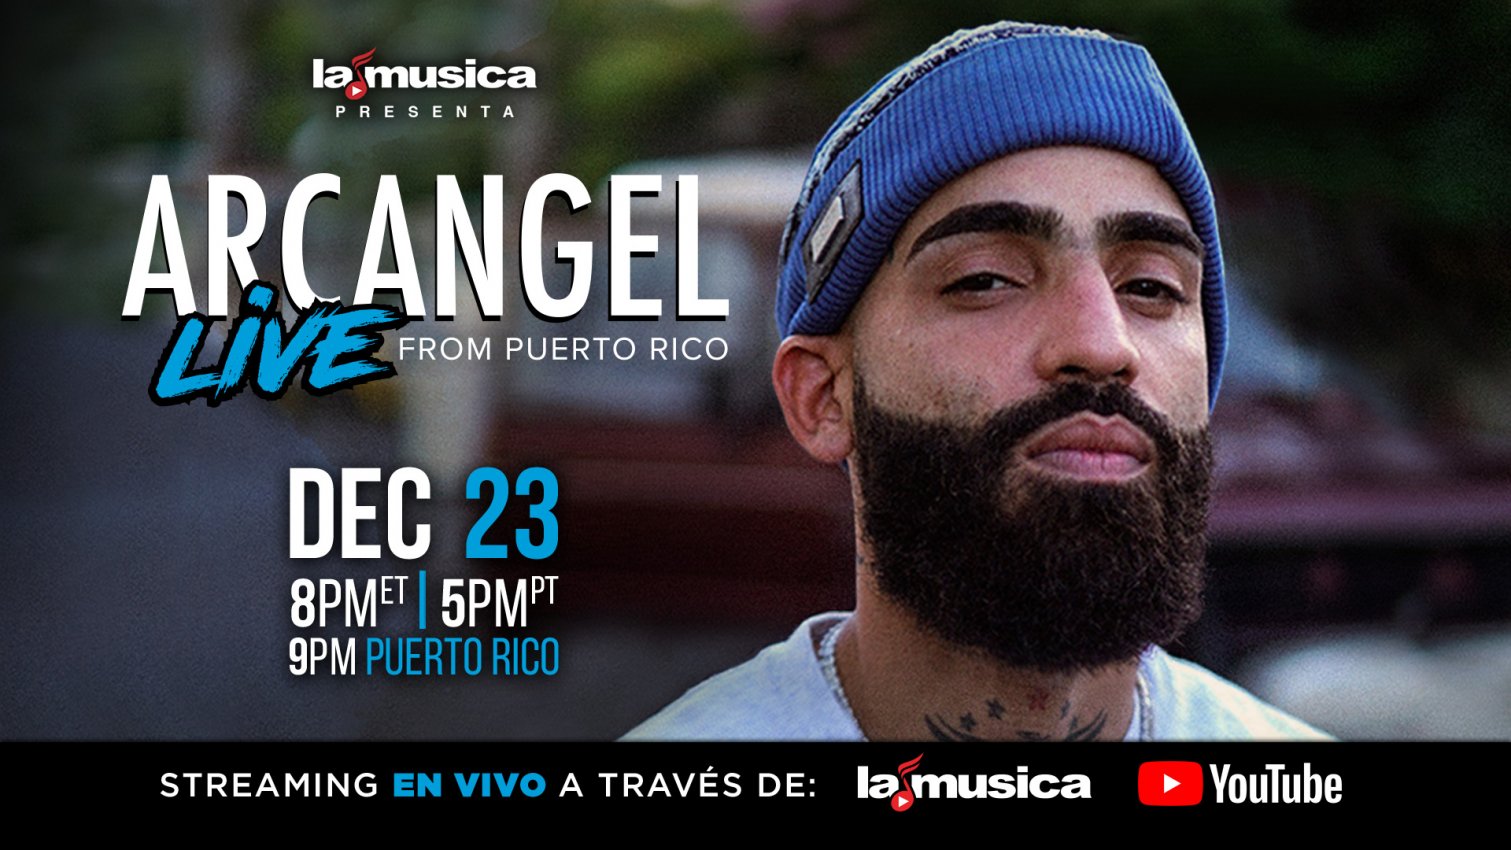 Arcangel Live from Puerto Rico